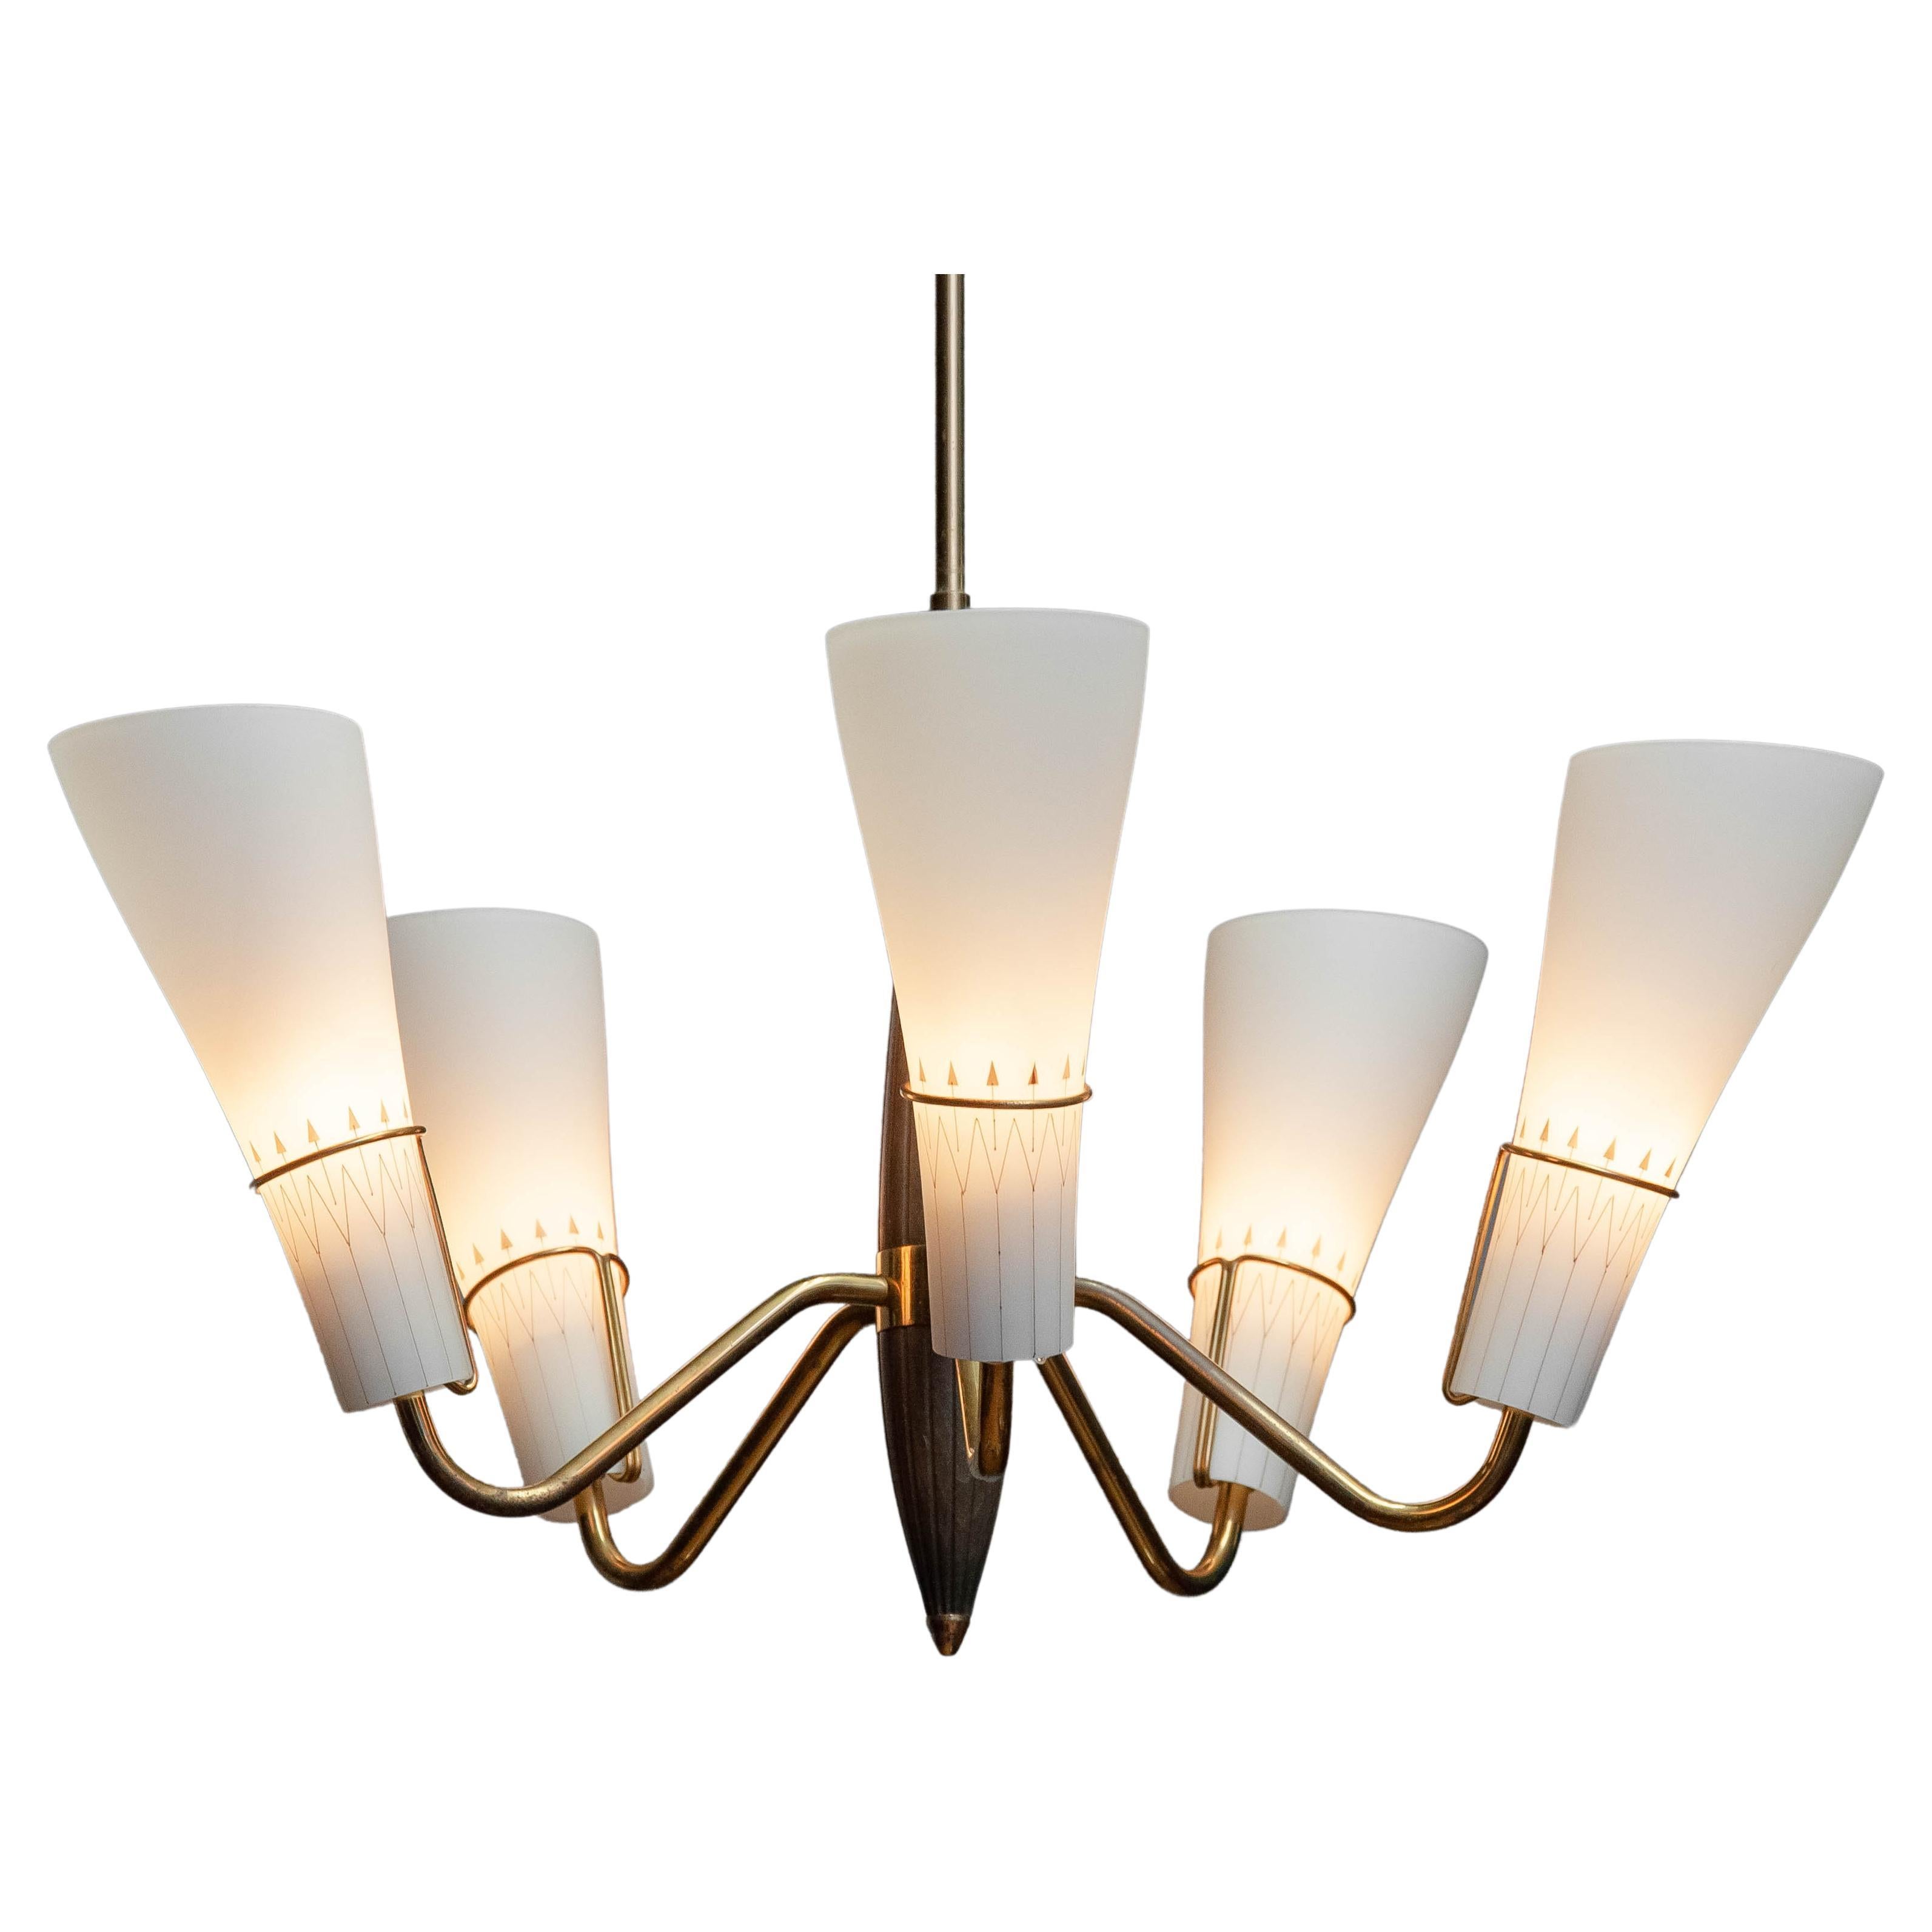 1950s Swedish Brass With Beech Five Arm Chandelier With Frosted Art Glass Shades For Sale